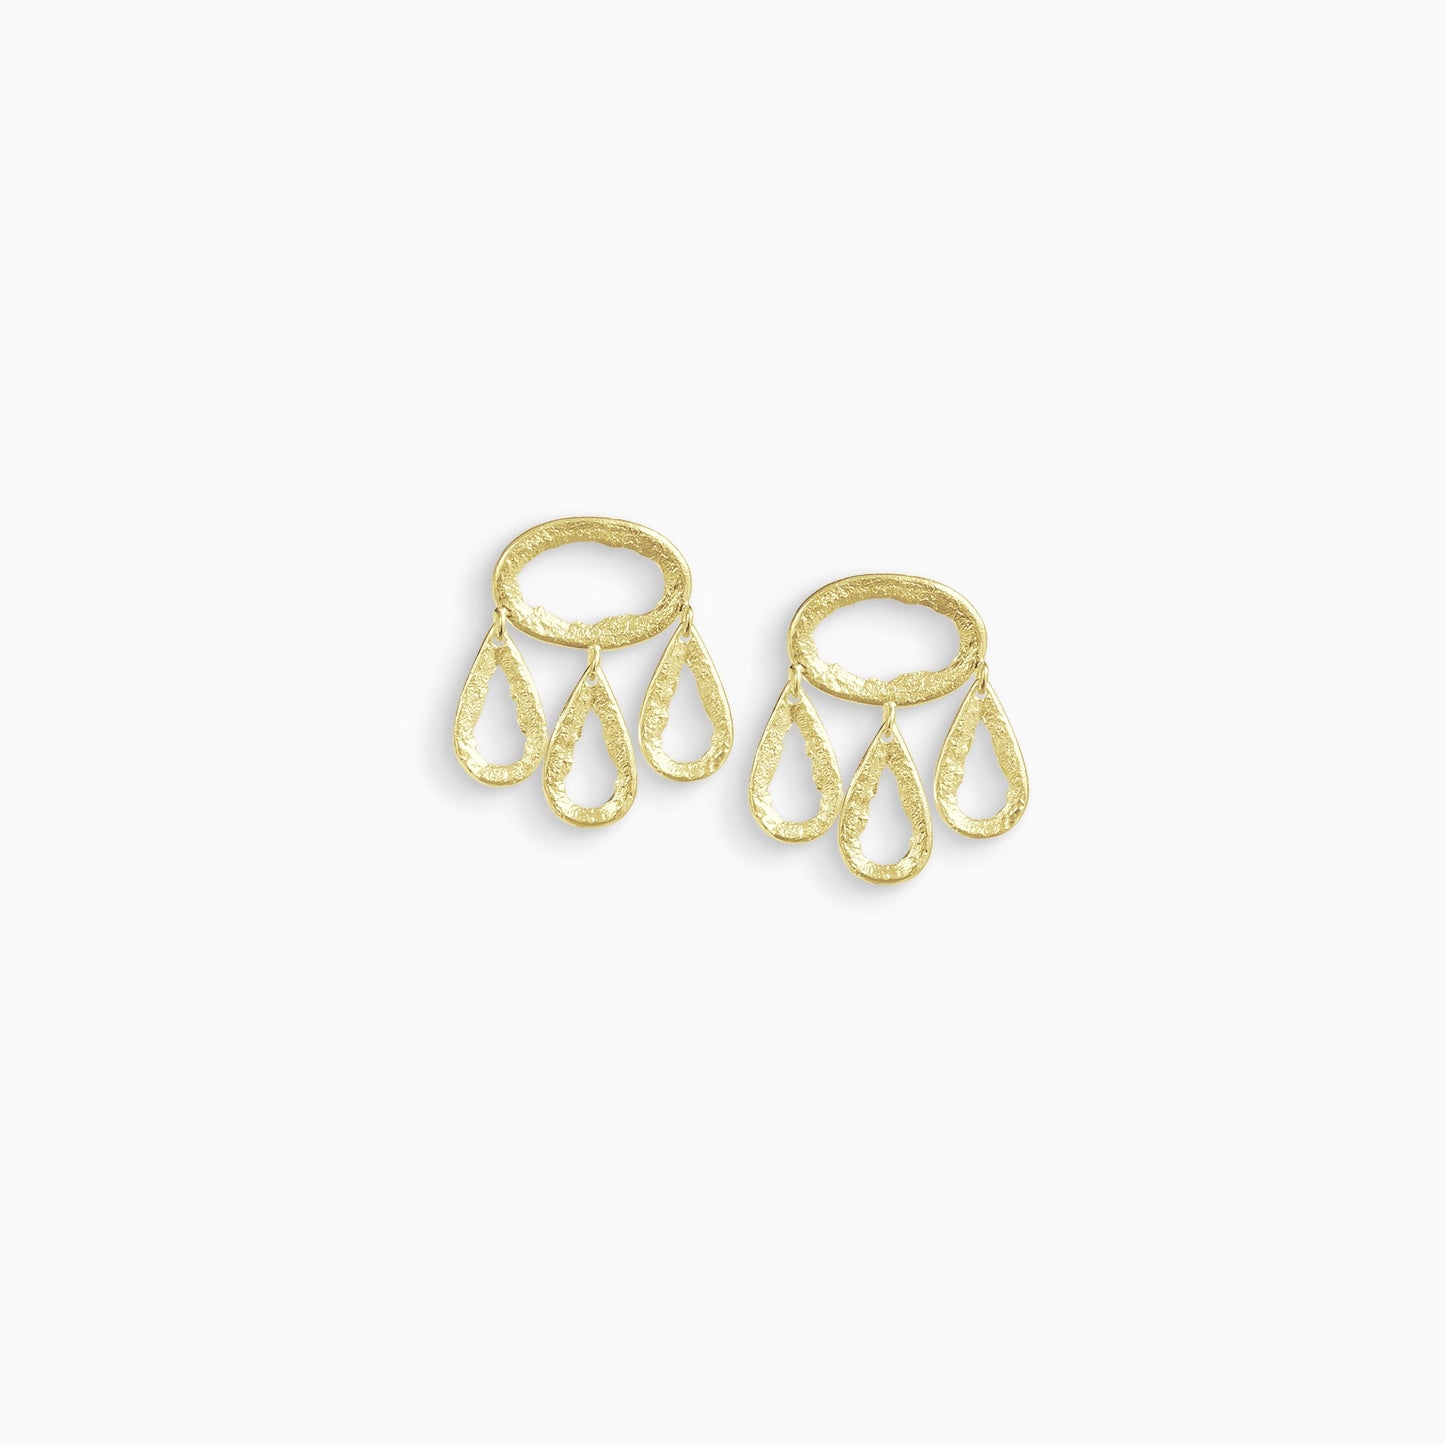 A pair of 18ct Fairtrade yellow gold drop earrings. 3 articulating small teardrop shapes hang hang from a horizontal oval shape with a stud ear fastening. These open shapes have a strong organic texture and are smooth on the outside edges with fragmented inside edges. 28mm length. 25mm width.